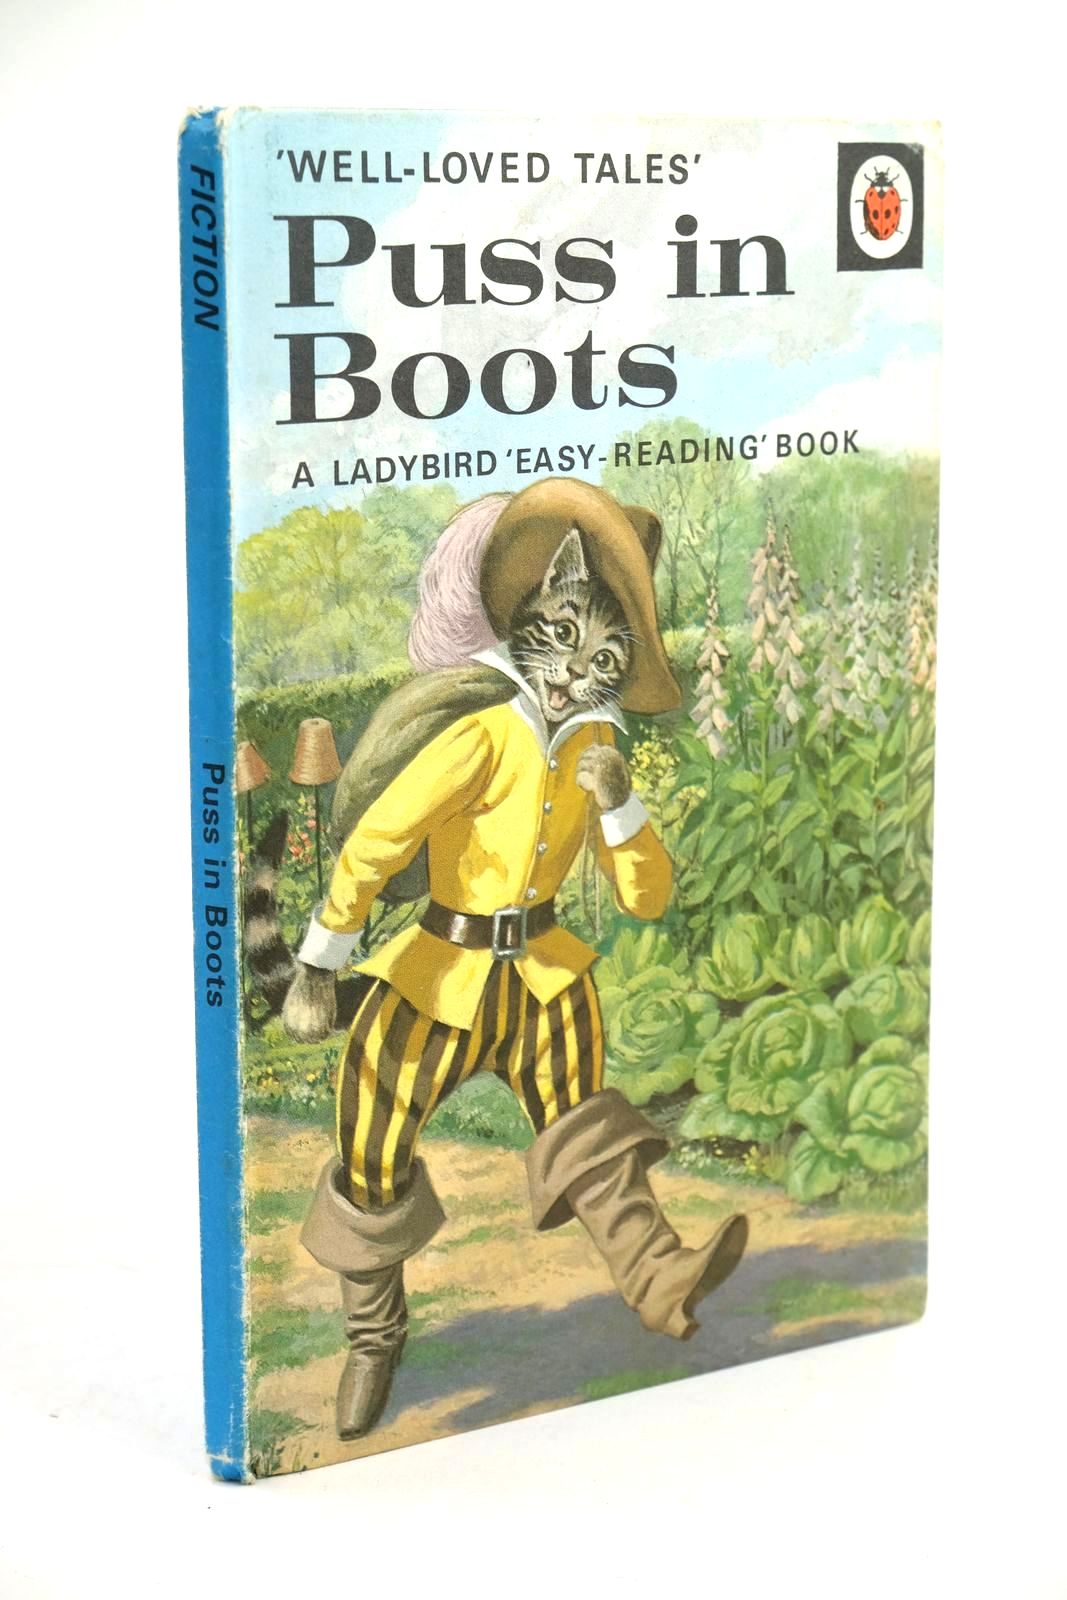 Photo of PUSS IN BOOTS written by Southgate, Vera illustrated by Winter, Eric published by Wills &amp; Hepworth Ltd. (STOCK CODE: 1321457)  for sale by Stella & Rose's Books